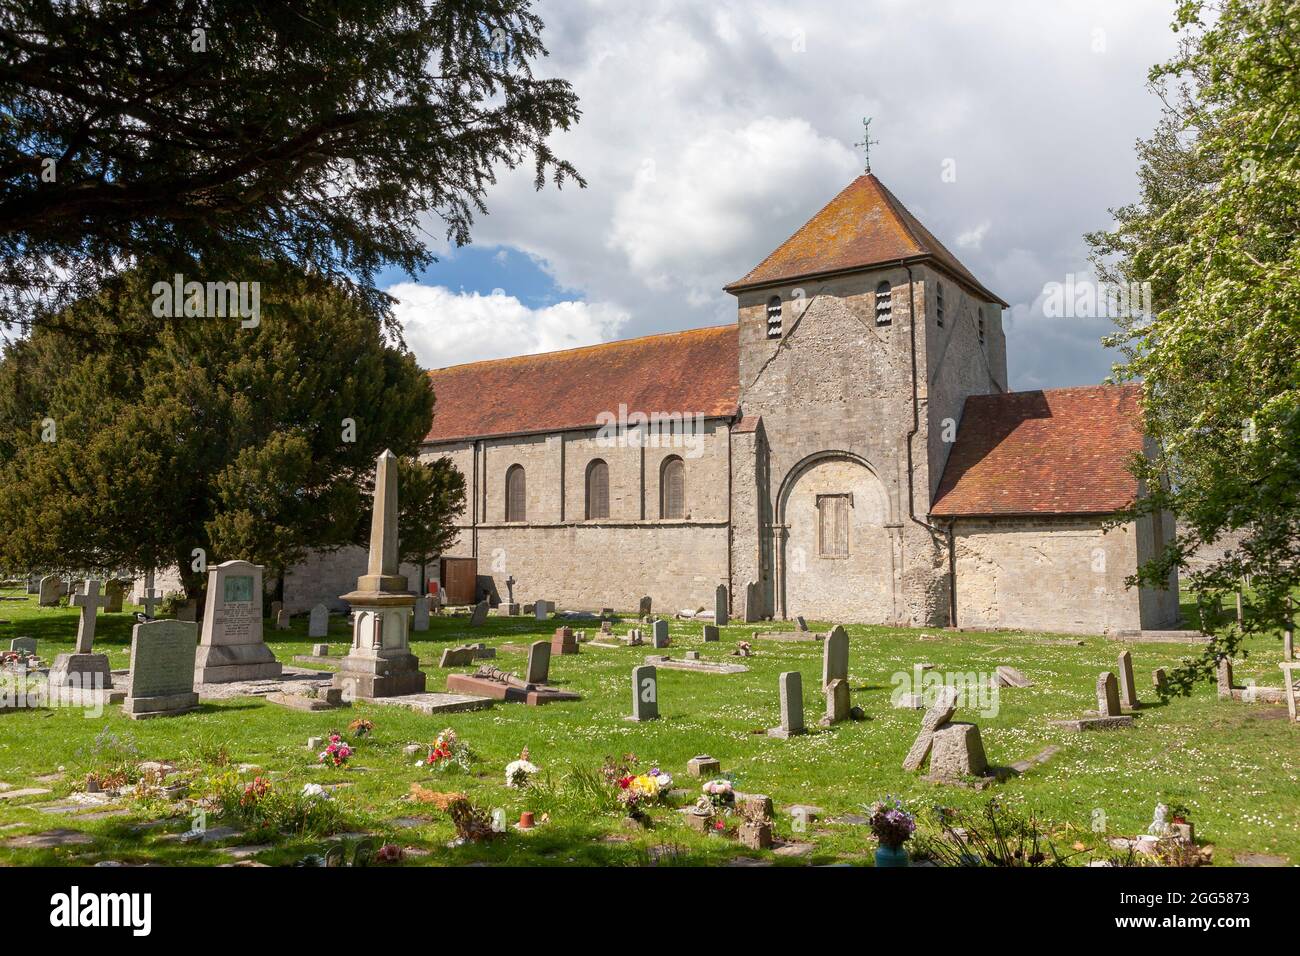 The 12th century Norman church of St Mary, within Portchester Castle's outer bailey, with the surrounding cemetery: Portchester, Hampshire, UK Stock Photo